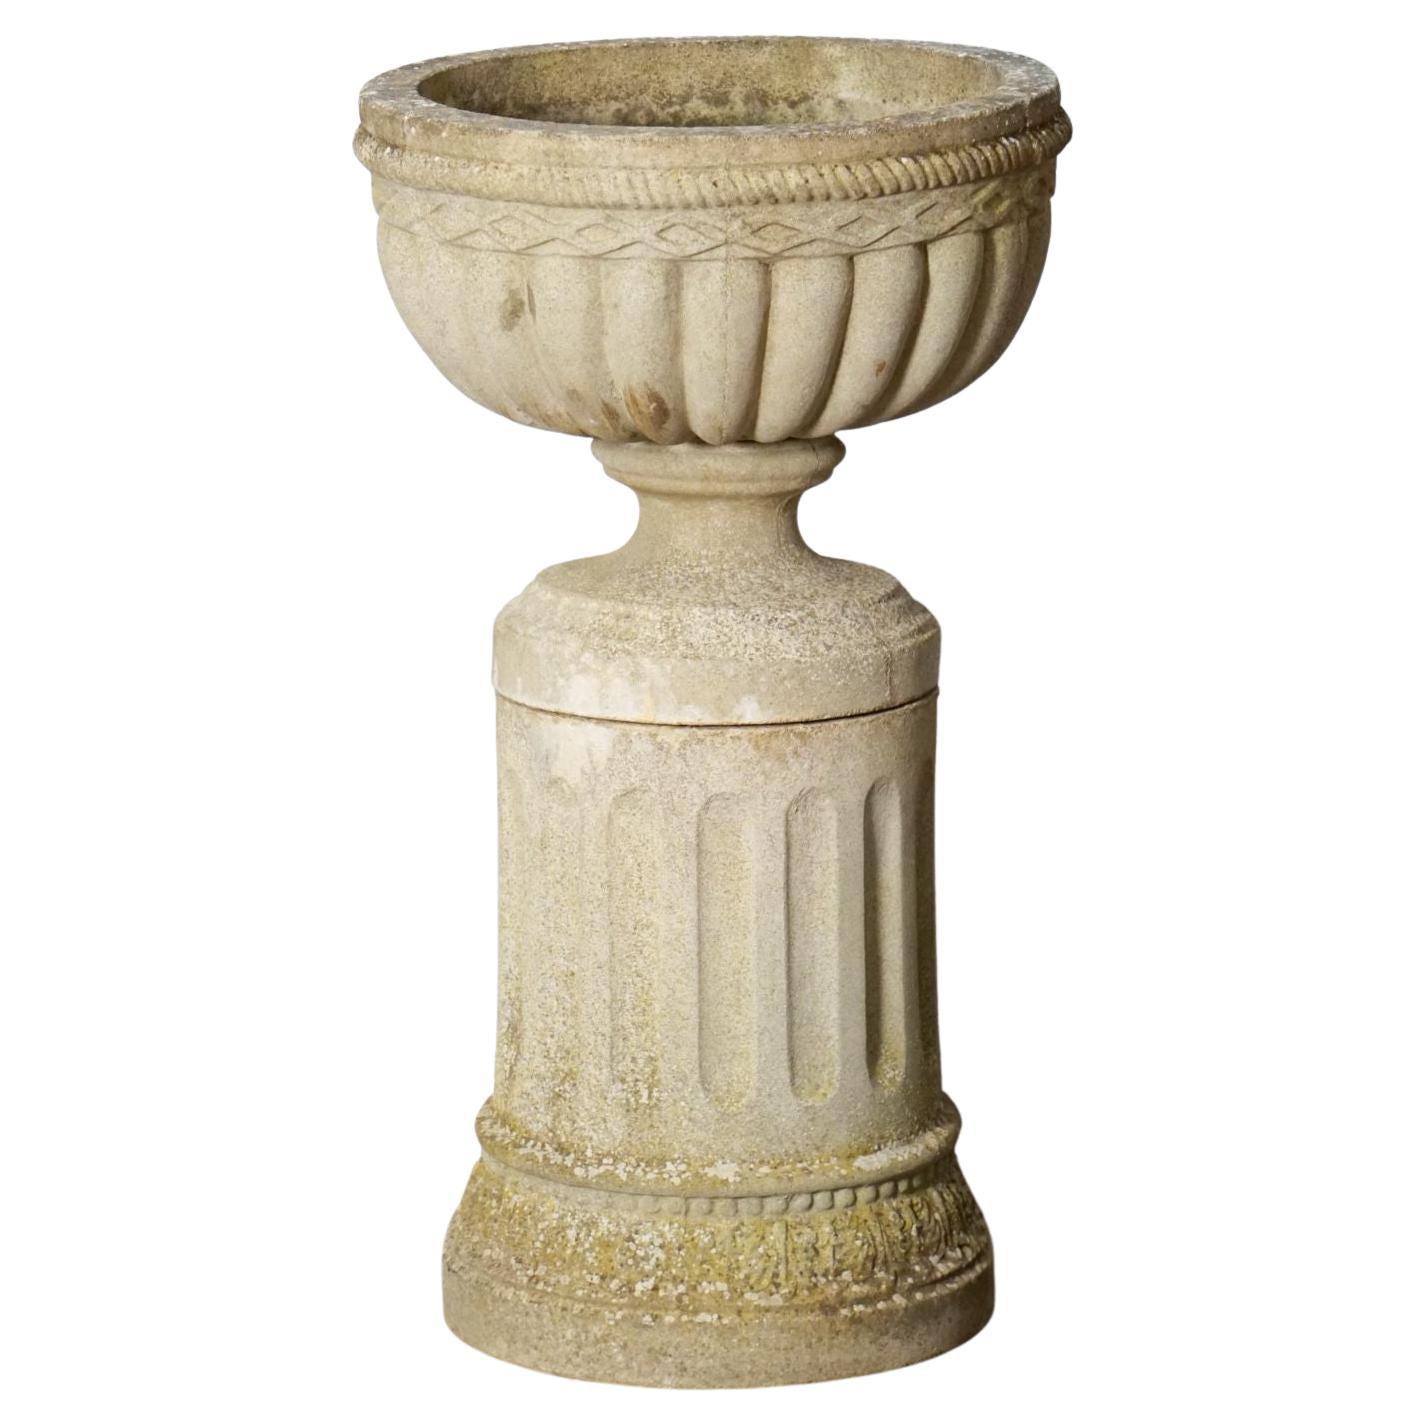 English Garden Stone Urn on Plinth in the Neo-Classical Style For Sale